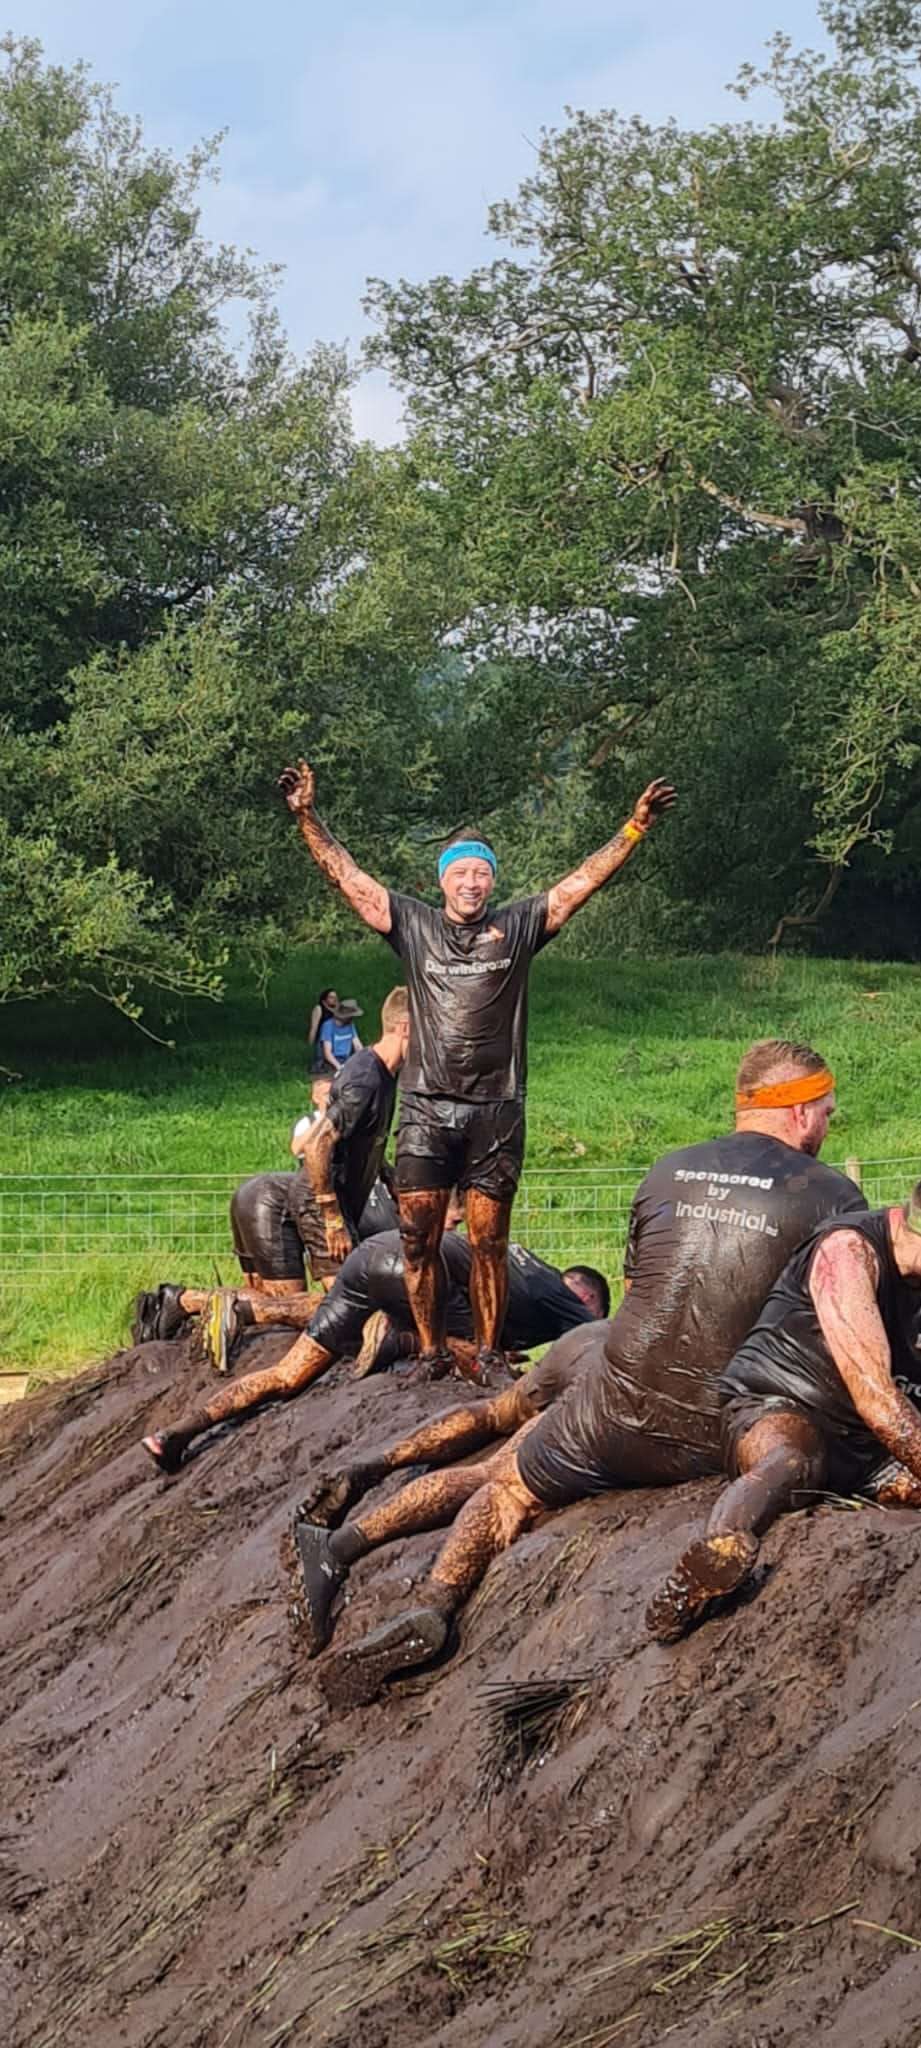 A group of people tackling a very muddy obstacle as part of the Tough Mudder challenge. They are all soaking wet and covered in mud as they scramble over a mud bank. A Darwin Group employee is stood atop the mud bank with his arms raised in victory.